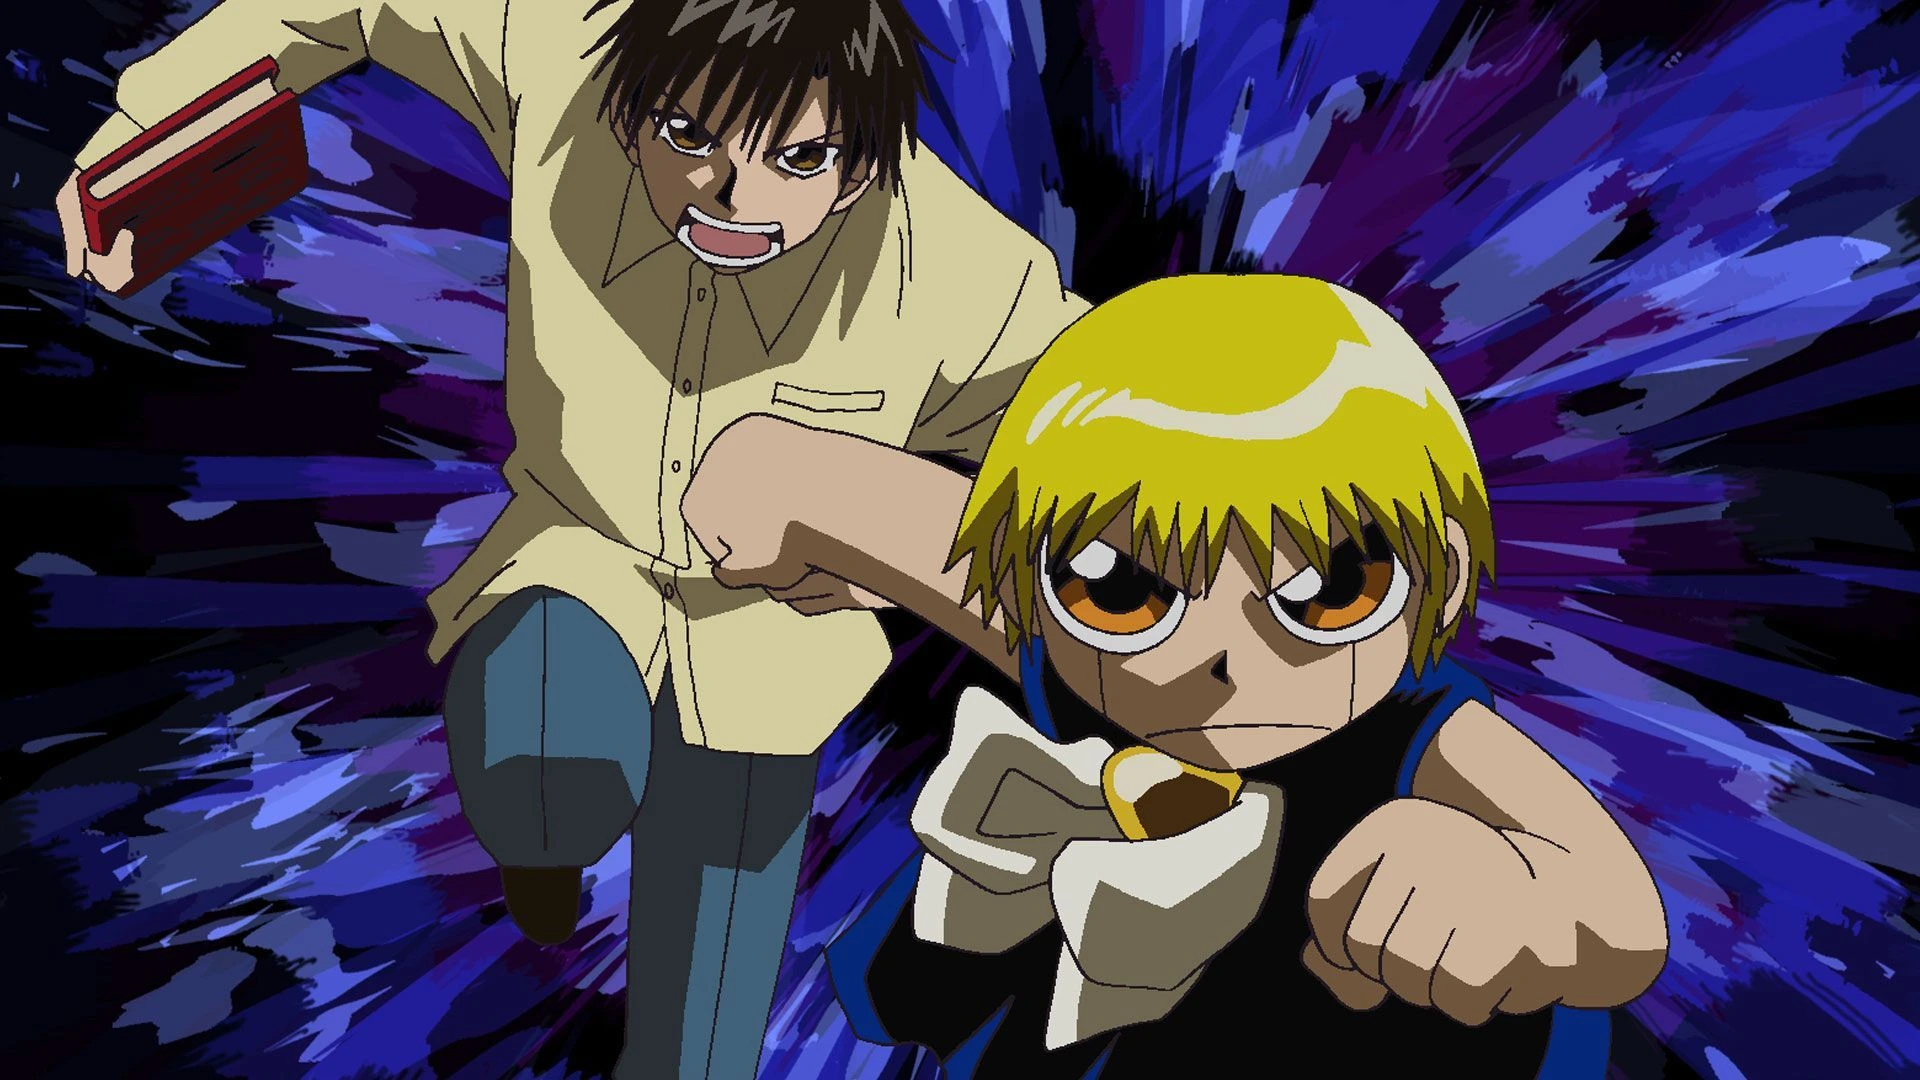 Zatch bell episode 1 english dubbed